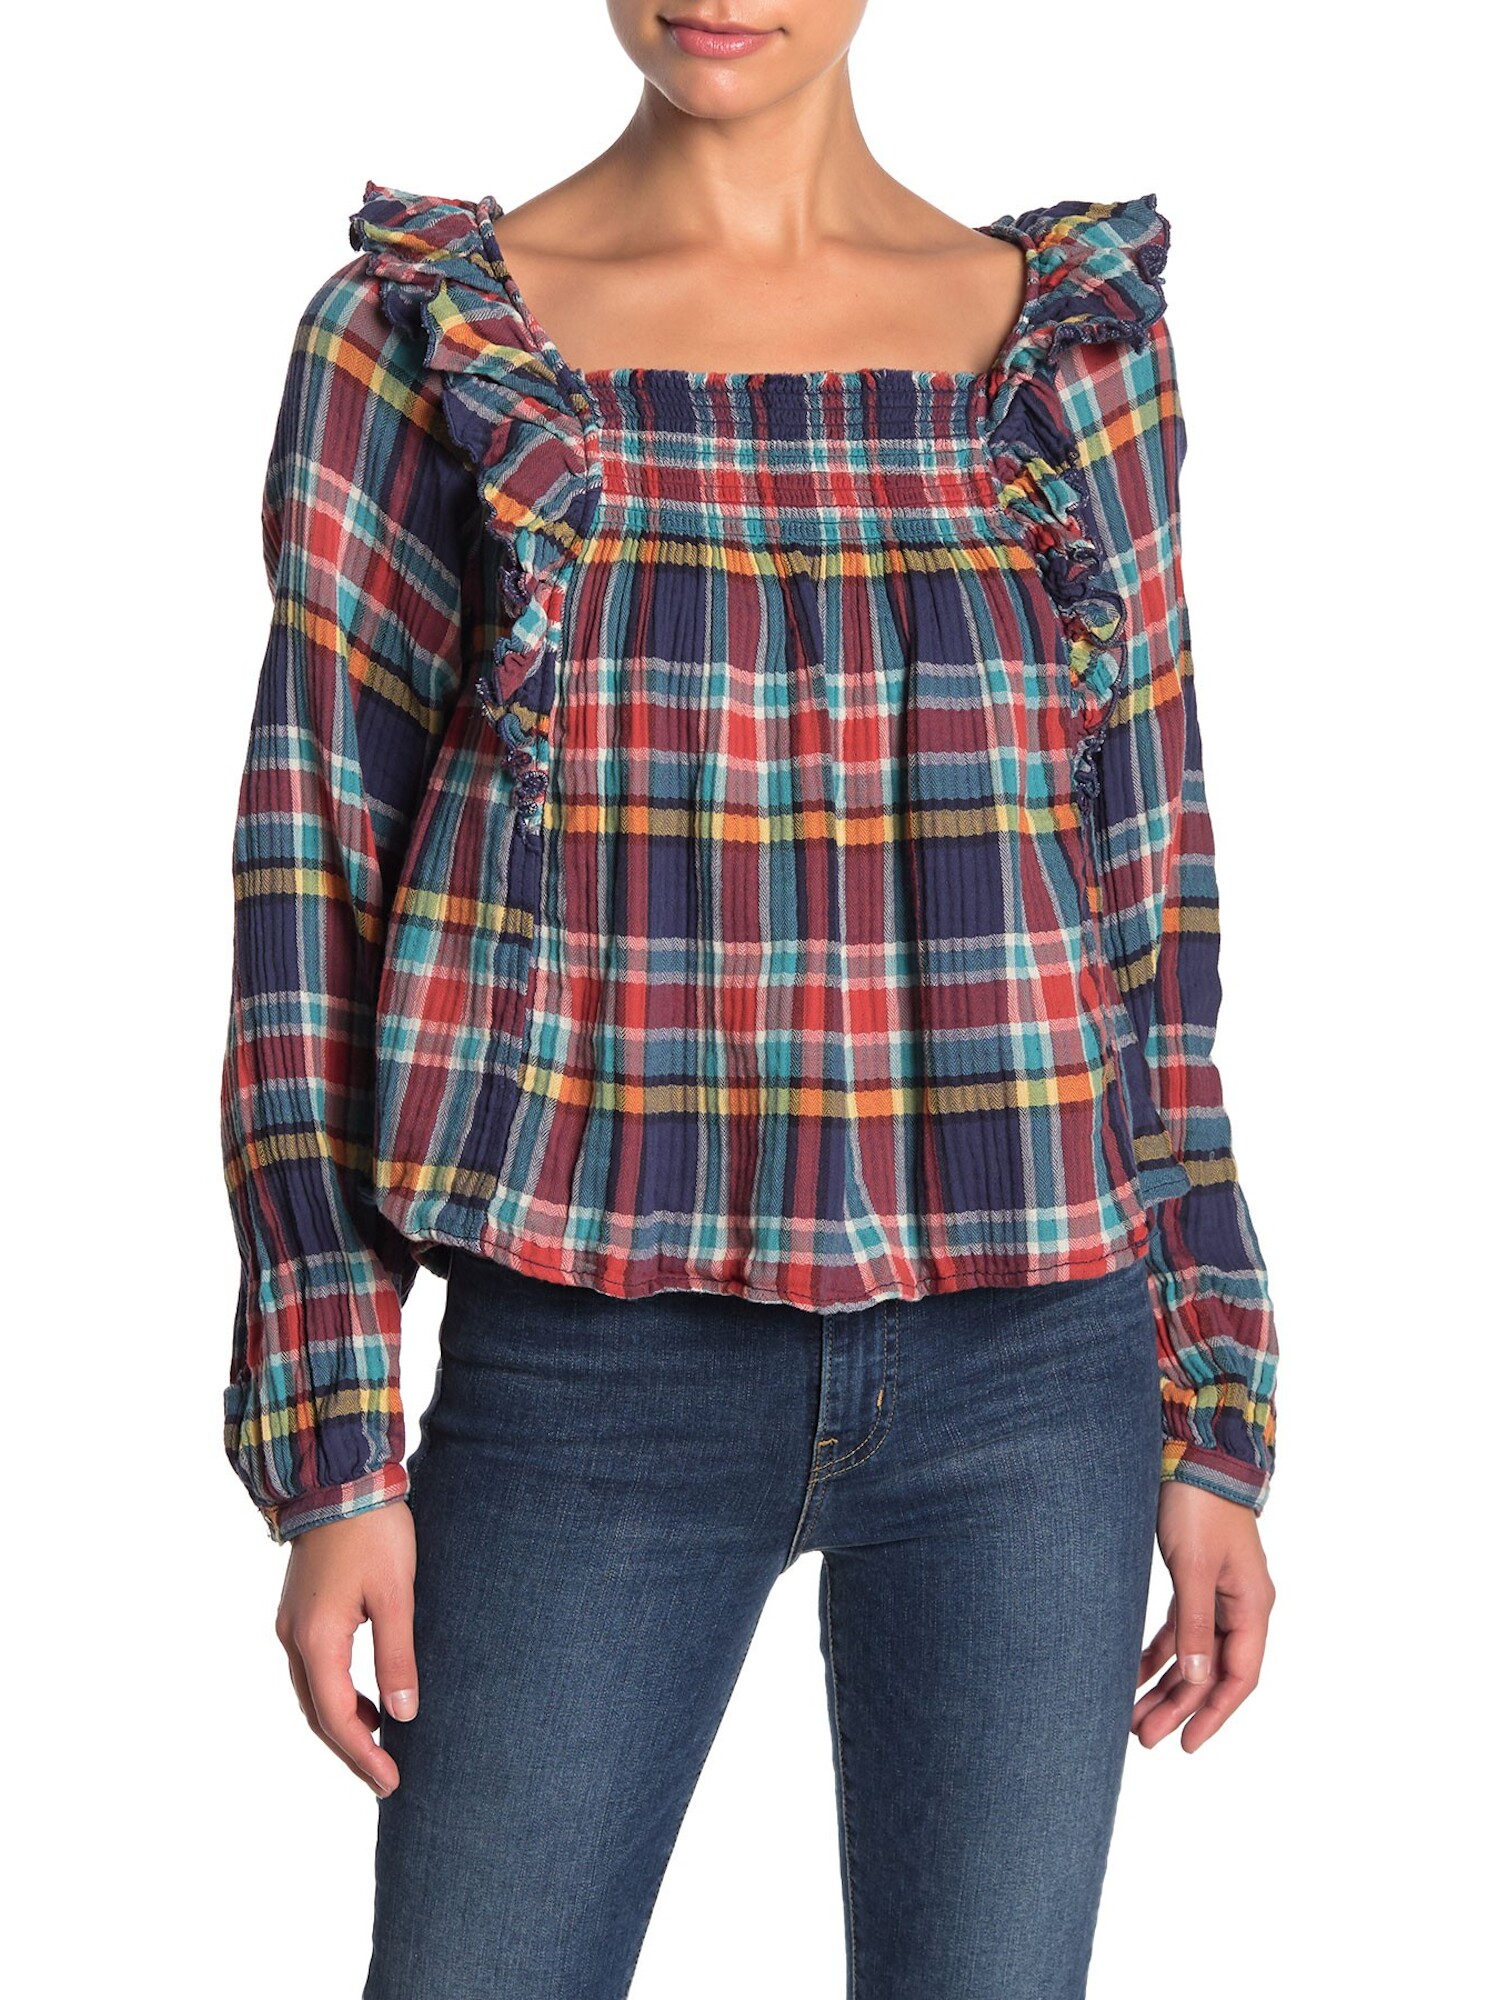 FREE PEOPLE Womens Navy Plaid Long Sleeve Square Neck Top Size: L - image 1 of 2